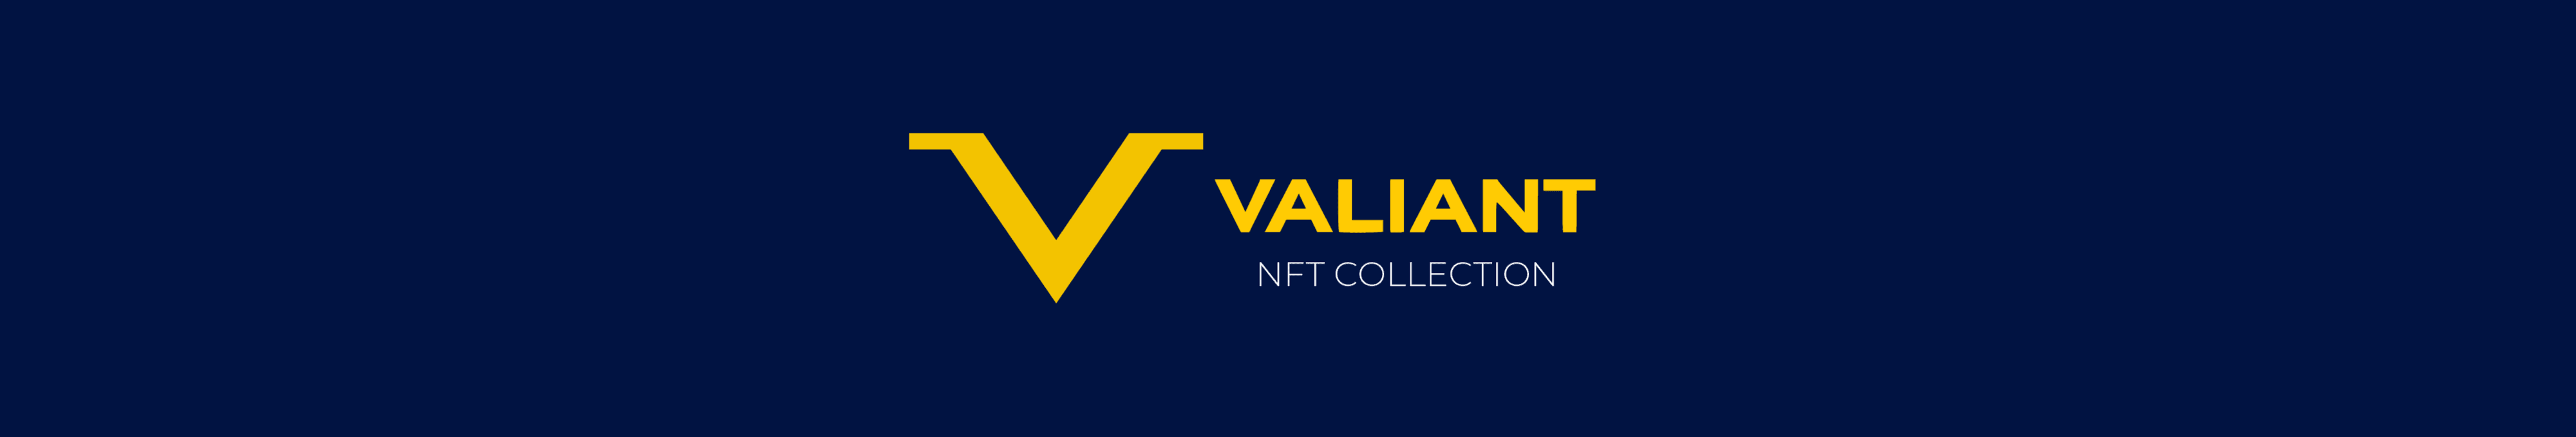 TheValiantCollection banner